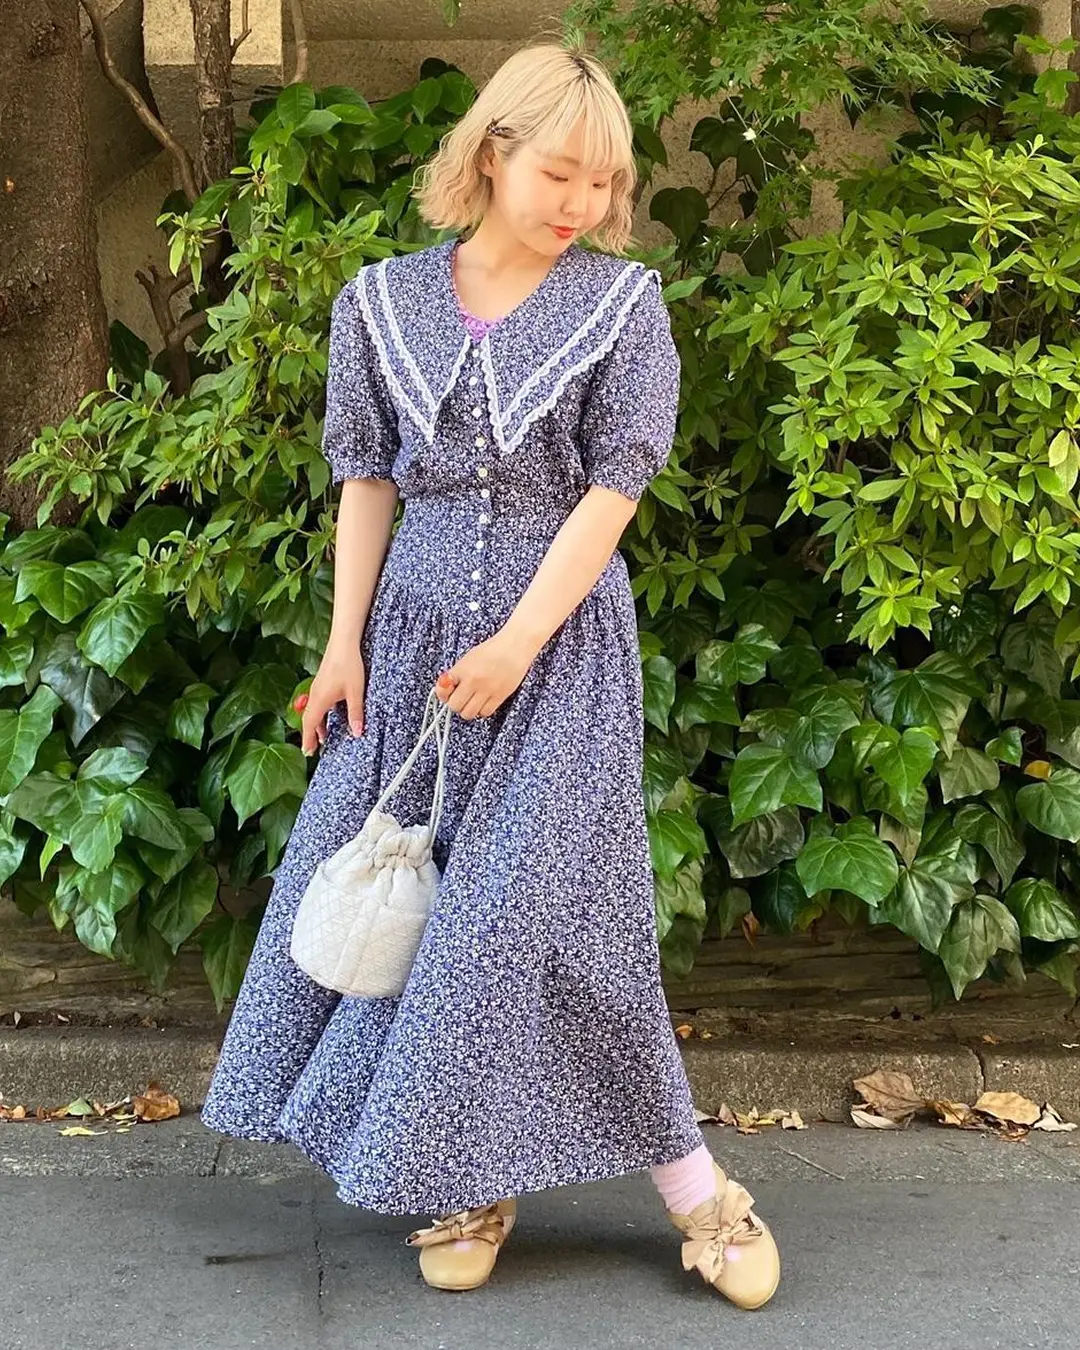 ❤️New❤️37 vintage ヴィンテージ レトロ 柄 シャツワンピース